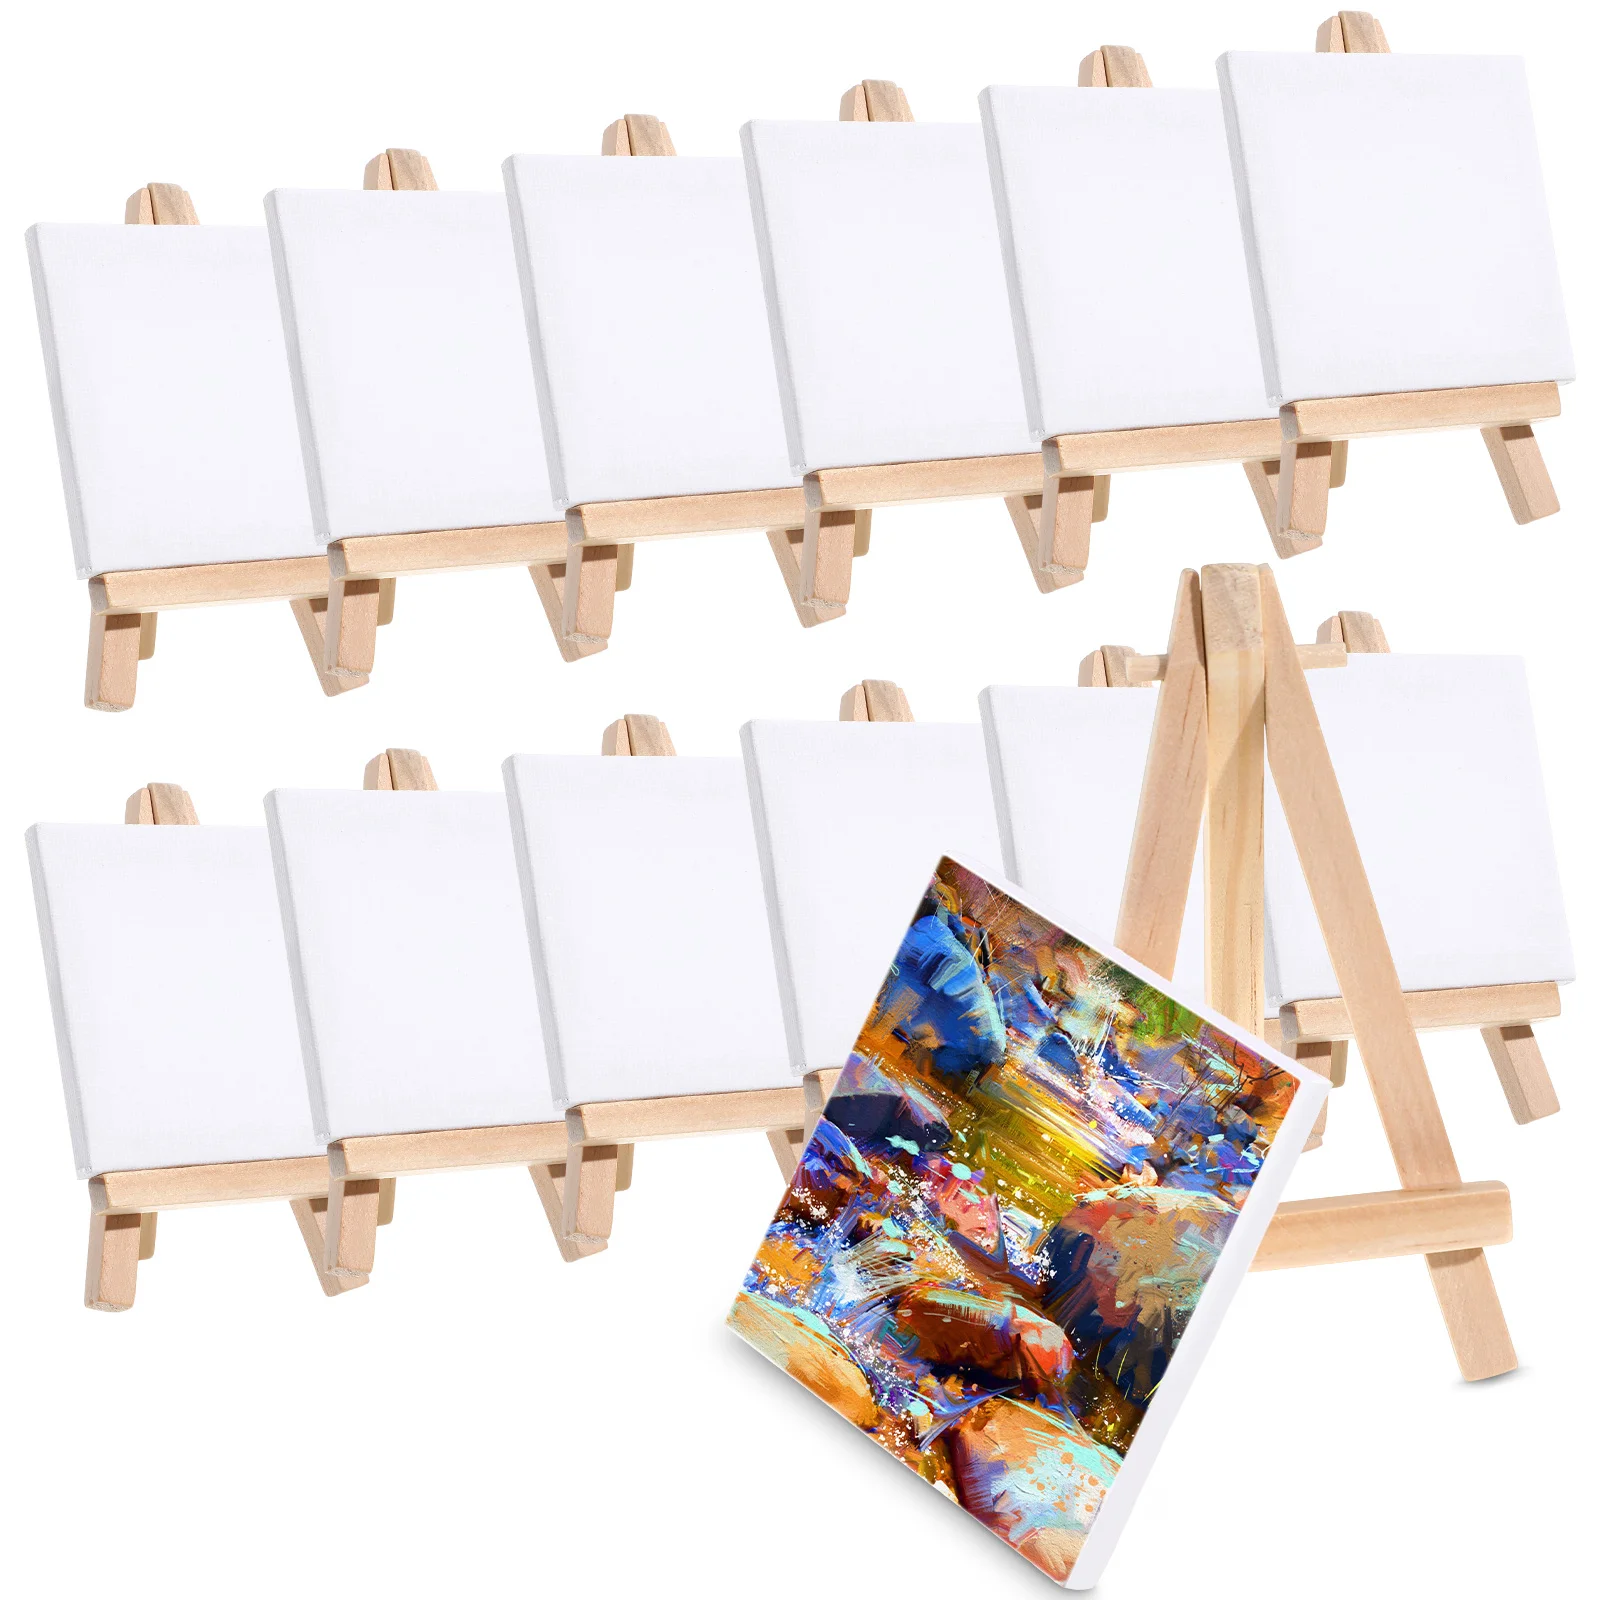 12 Sets Mini Easels with Canvas Boards Small Easel Stands with Canvas Panels for Kids Students Adults Painting